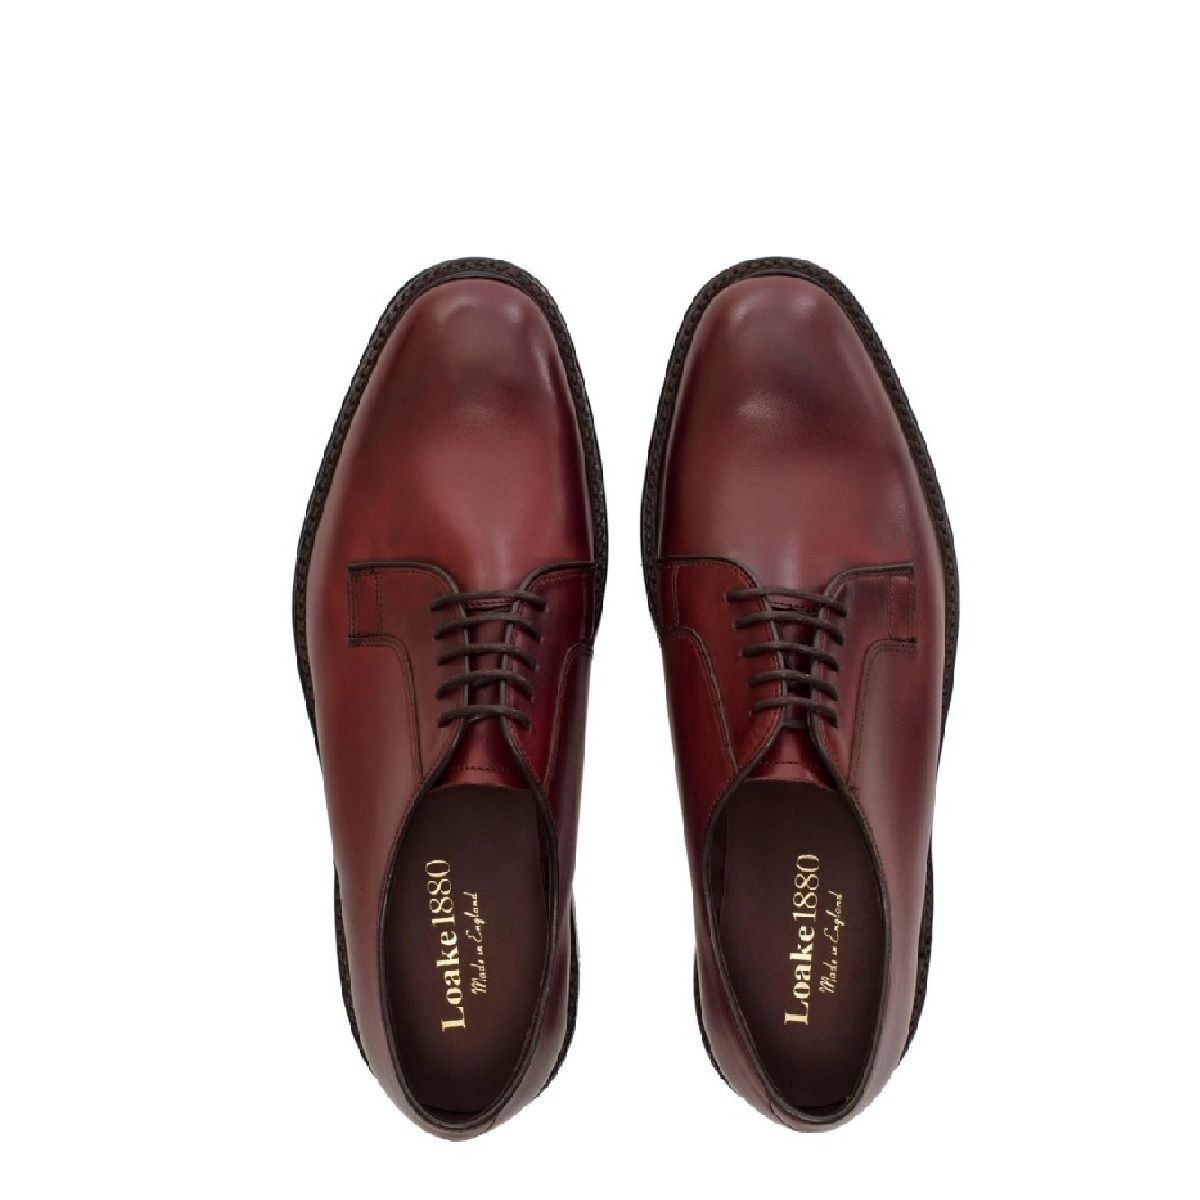 Loake Mens Perth Lace-Up shoe in Burgundy - County Shoes Dorchester